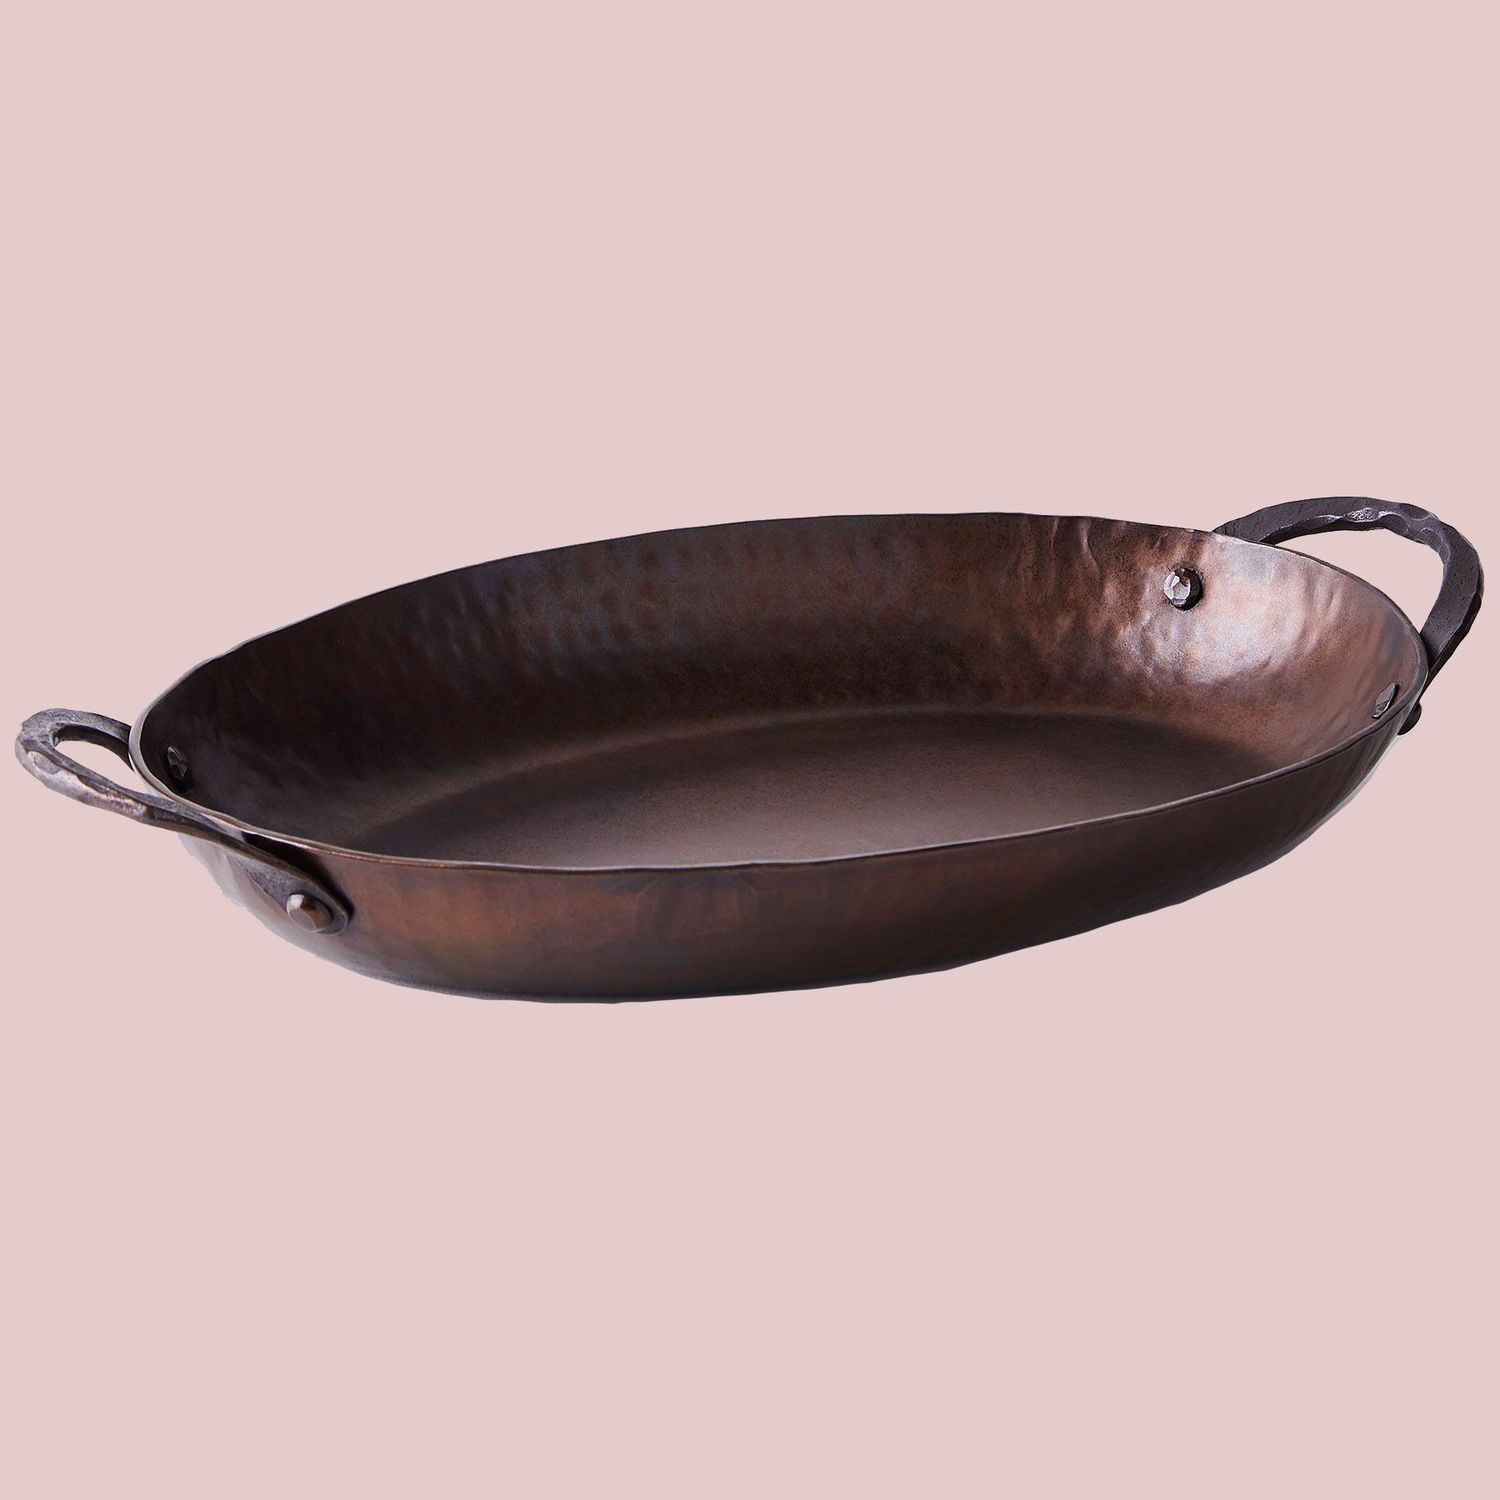 Best Small Roasting Pan: Smithey Hand Forged Carbon-Steel Oval Roasting Pan